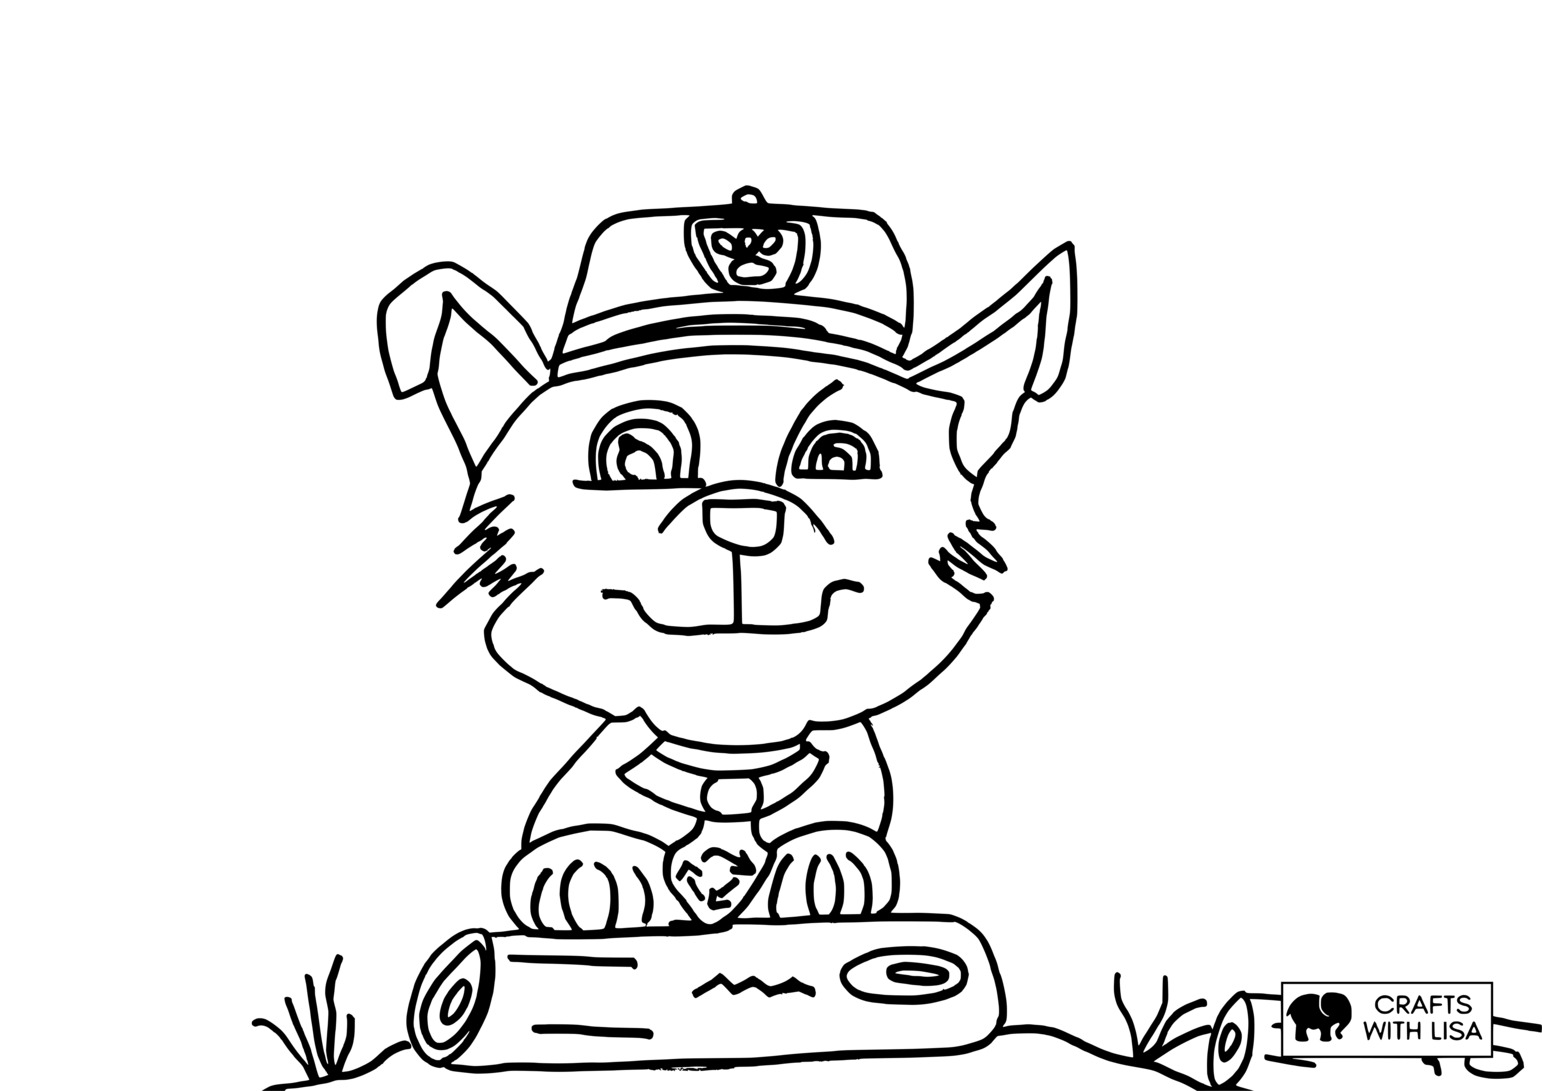 Rocky paw patrol on a log coloring page